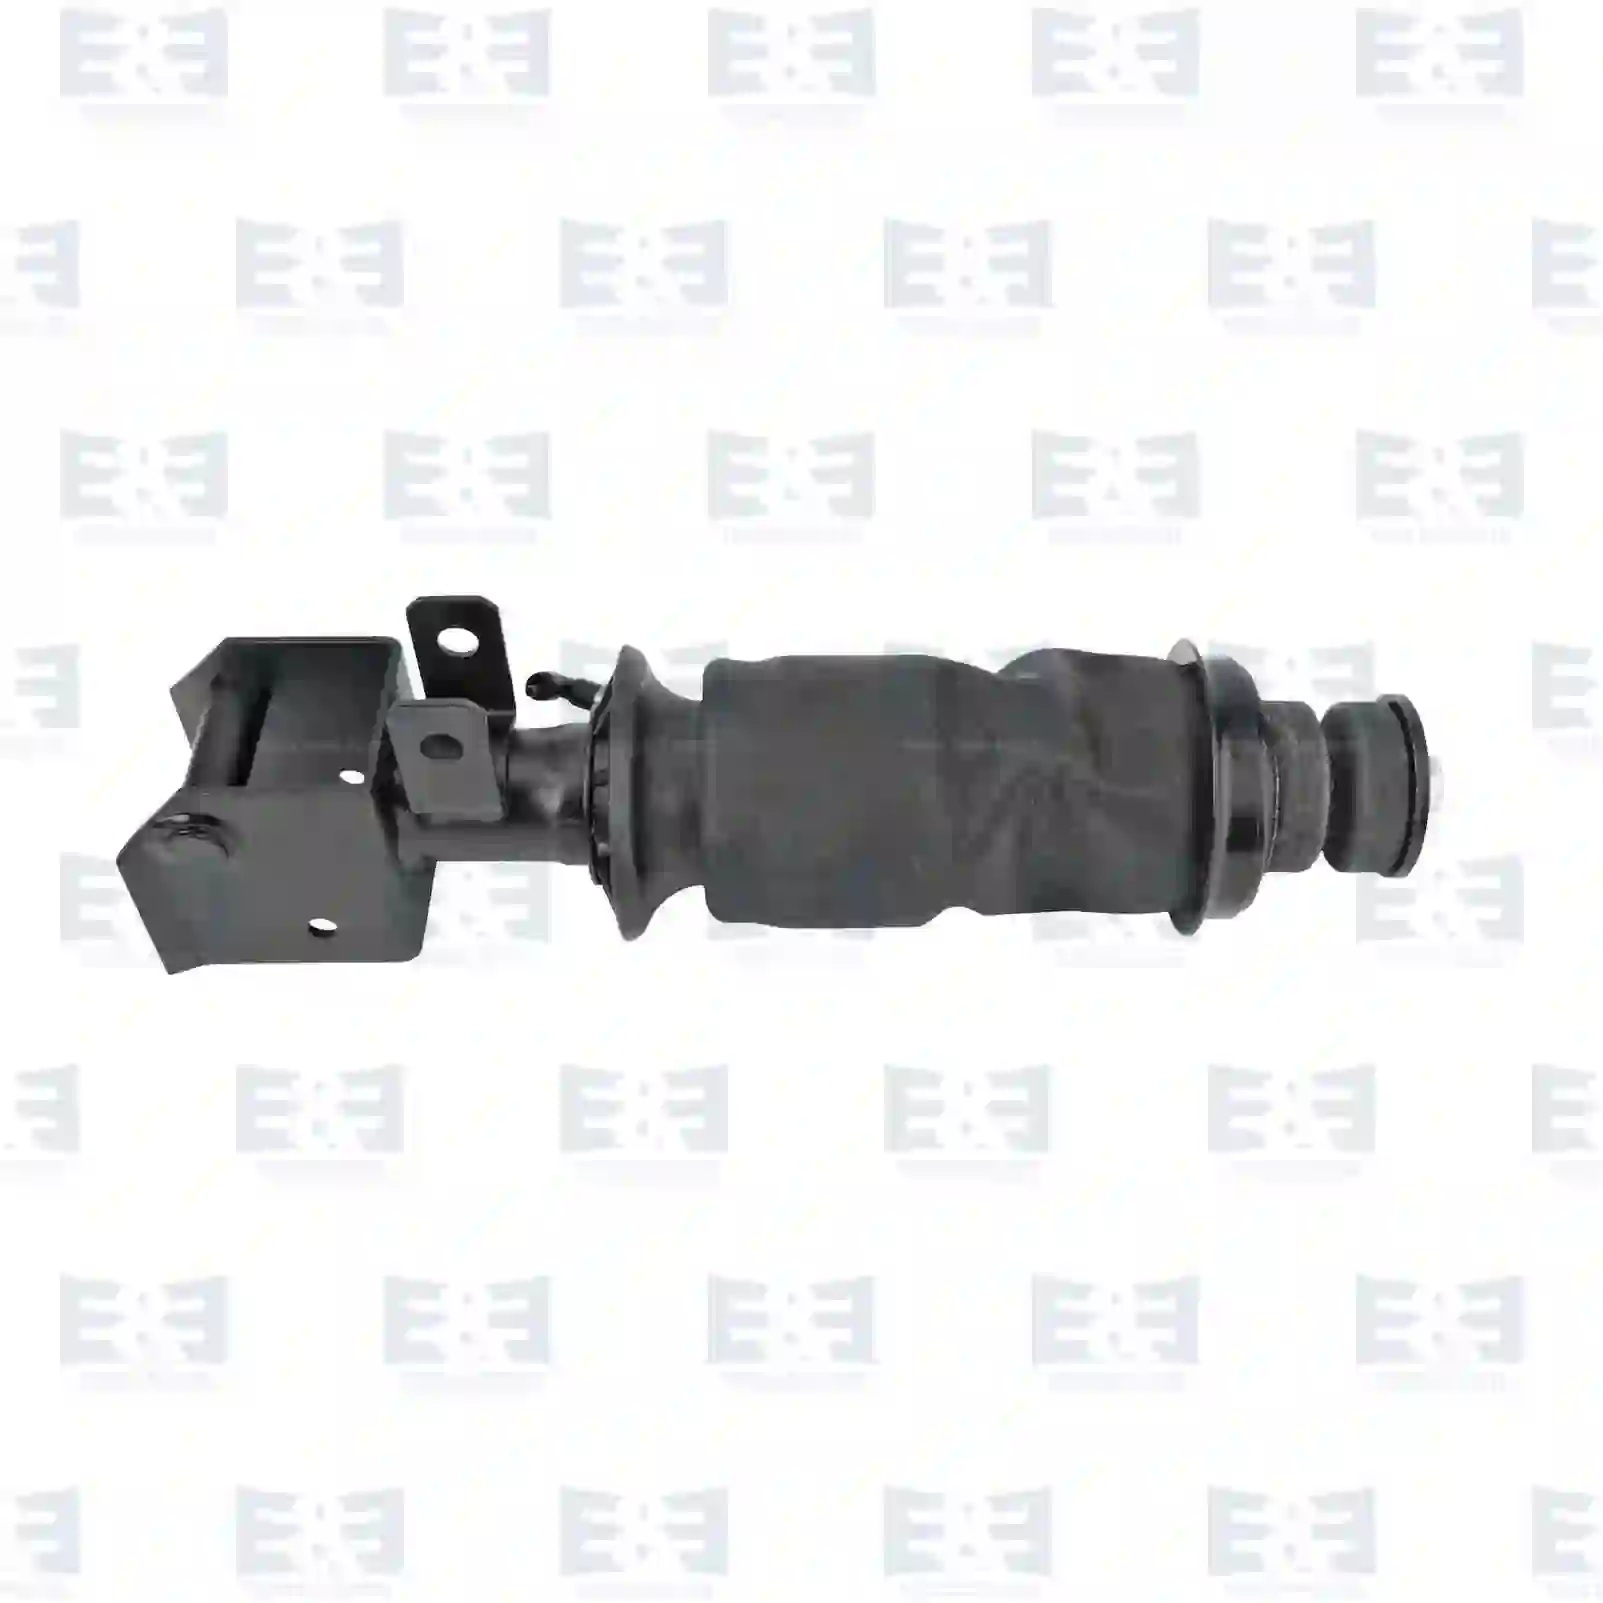 Cabin shock absorber, with air bellow, 2E2276332, 5010228849 ||  2E2276332 E&E Truck Spare Parts | Truck Spare Parts, Auotomotive Spare Parts Cabin shock absorber, with air bellow, 2E2276332, 5010228849 ||  2E2276332 E&E Truck Spare Parts | Truck Spare Parts, Auotomotive Spare Parts